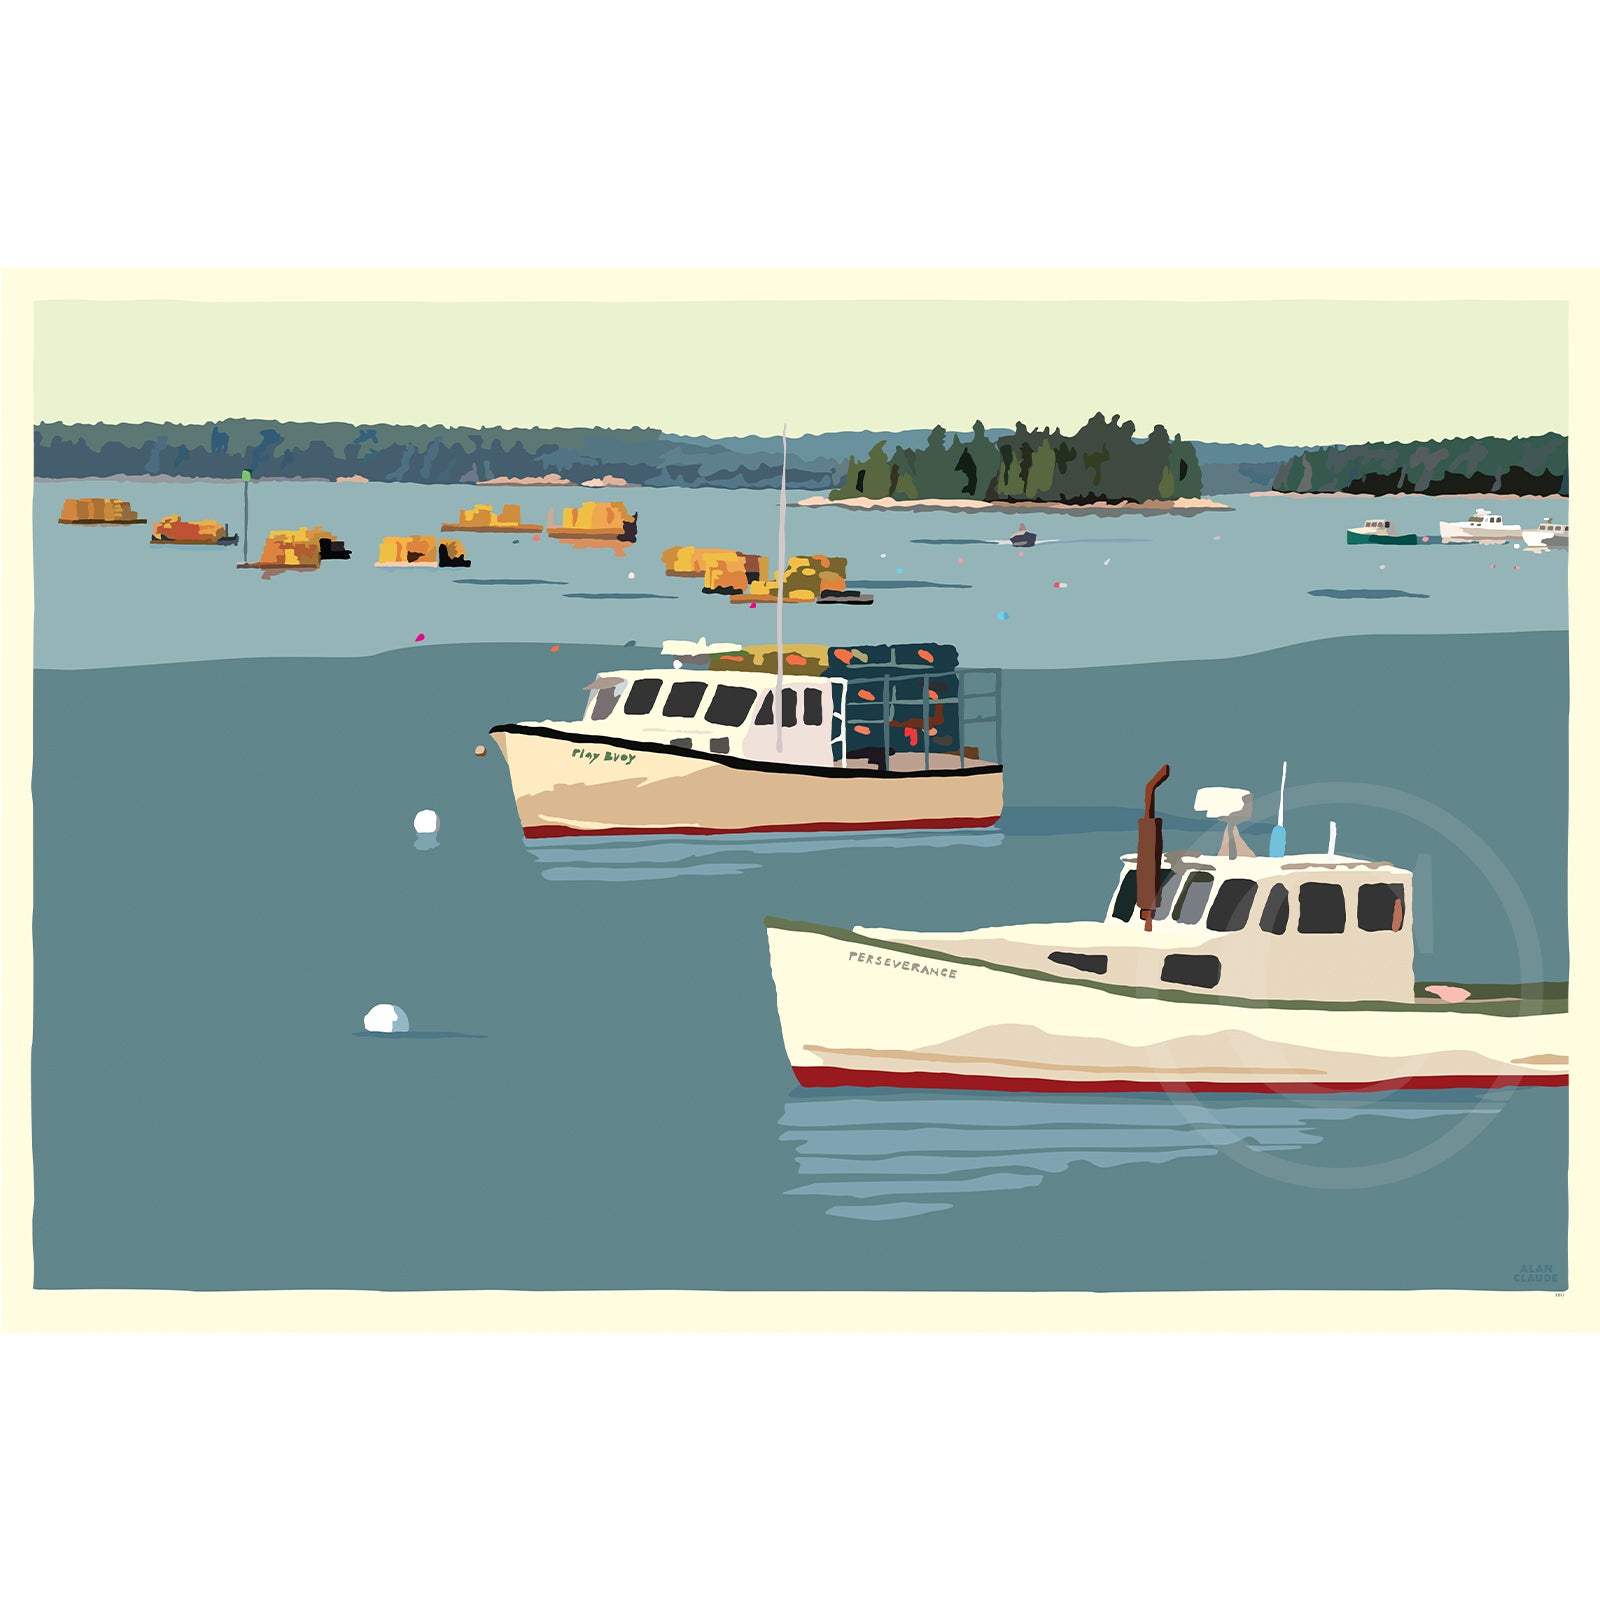 Lobster Boats in Friendship Art Print 36" x 53" Wall Poster By Alan Claude - Maine